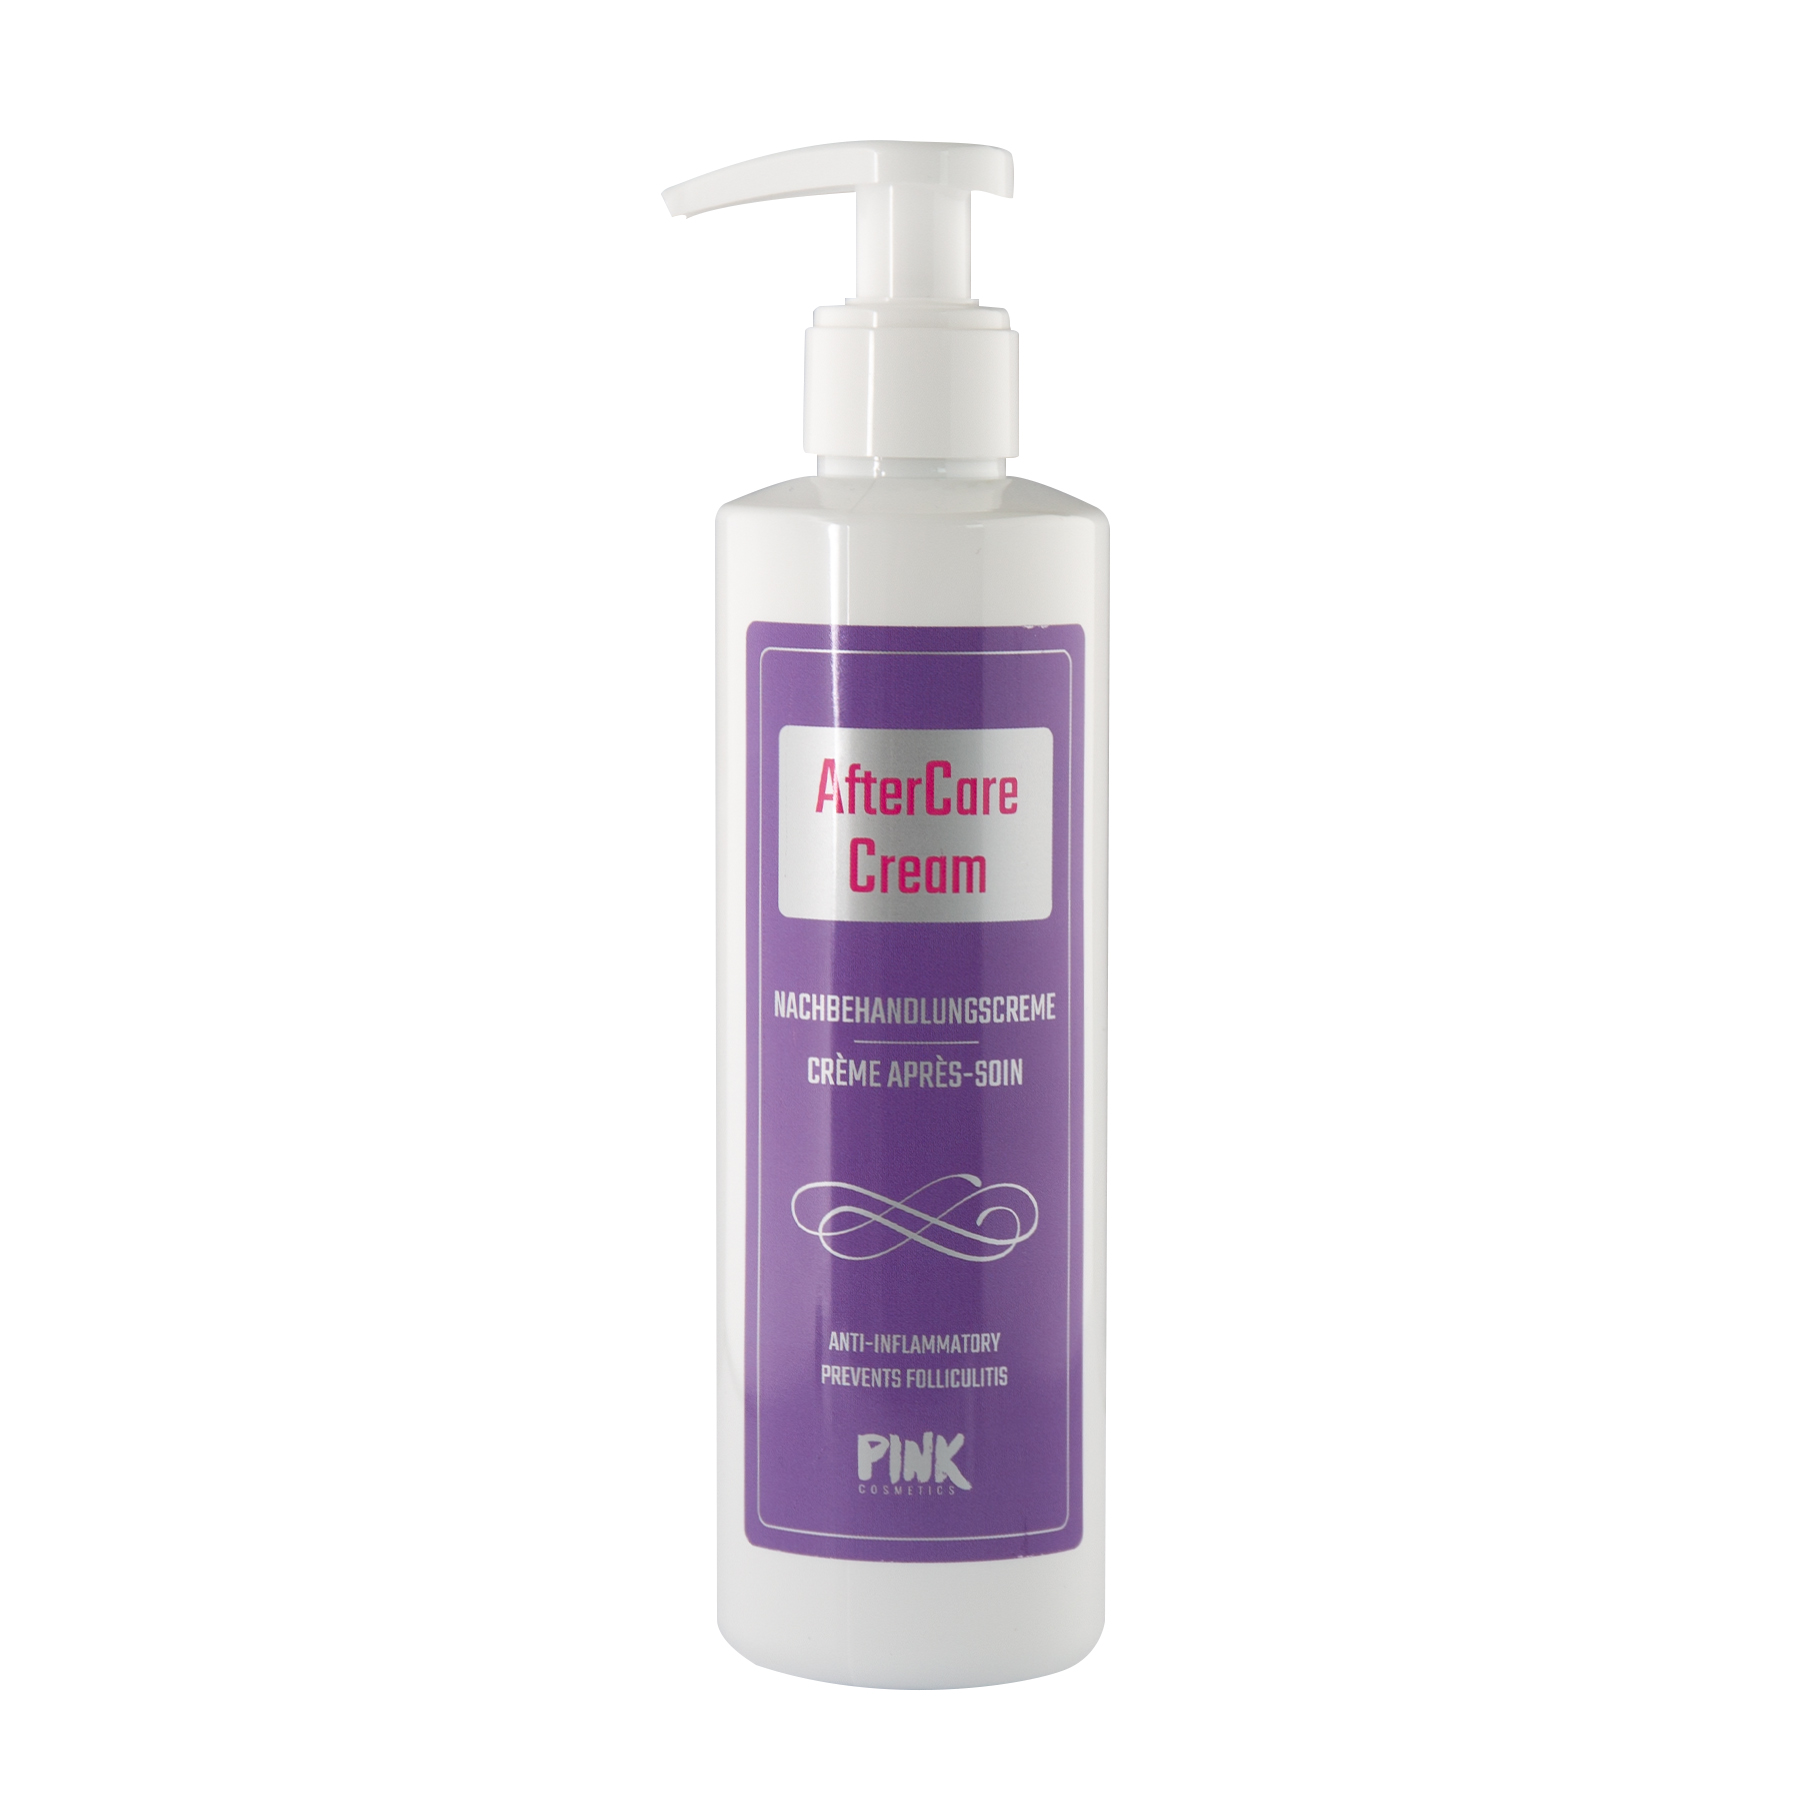 PINK | After Care Lotion | 500ml